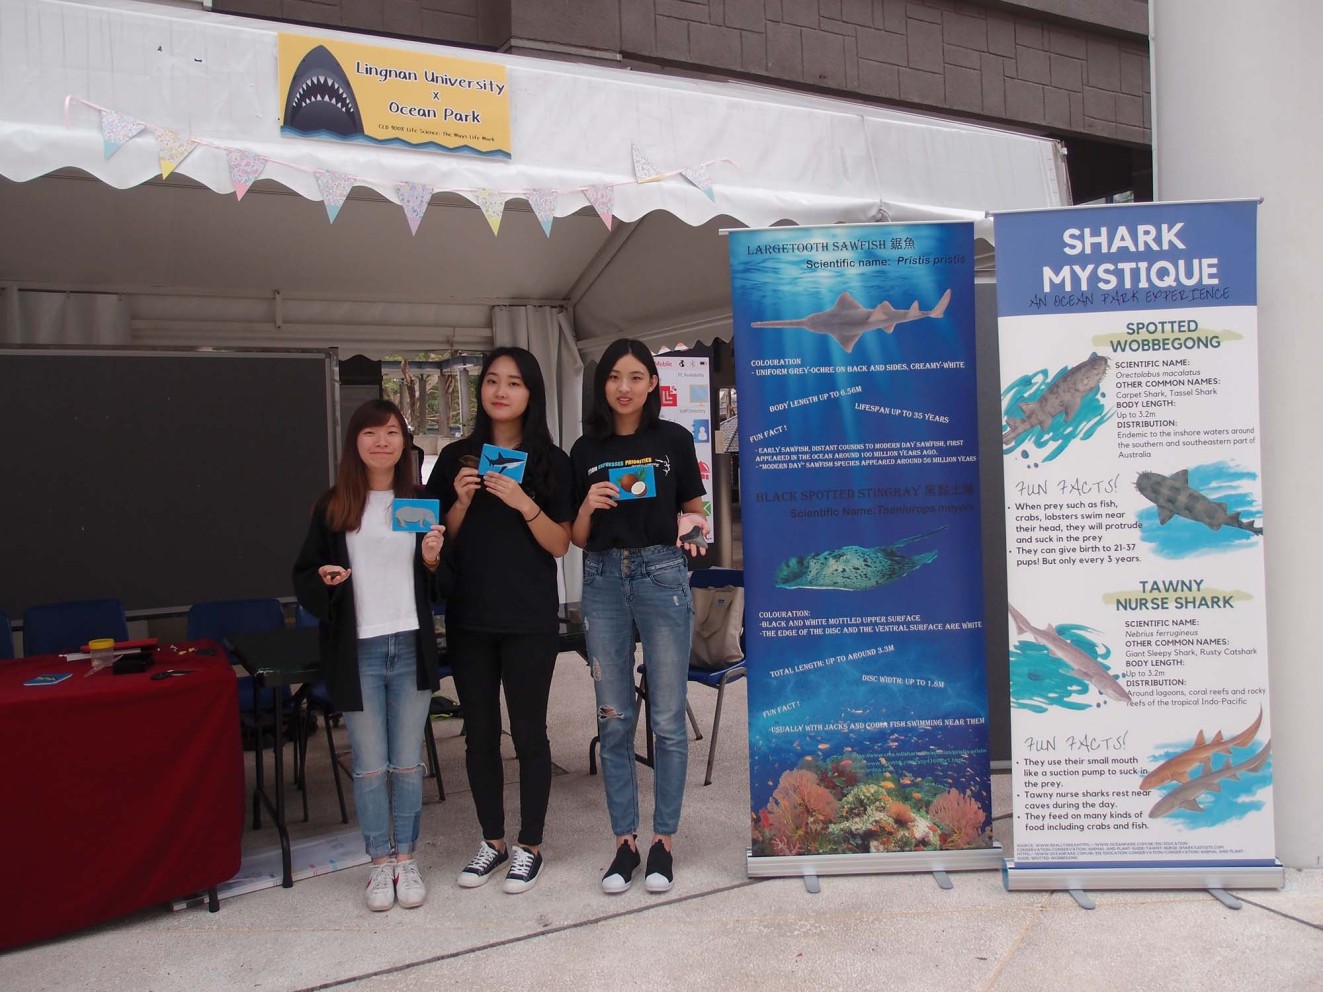 Collaborating with the Ocean Park Hong Kong, Lingnan students set up a game booth on campus to promote protection of sharks.